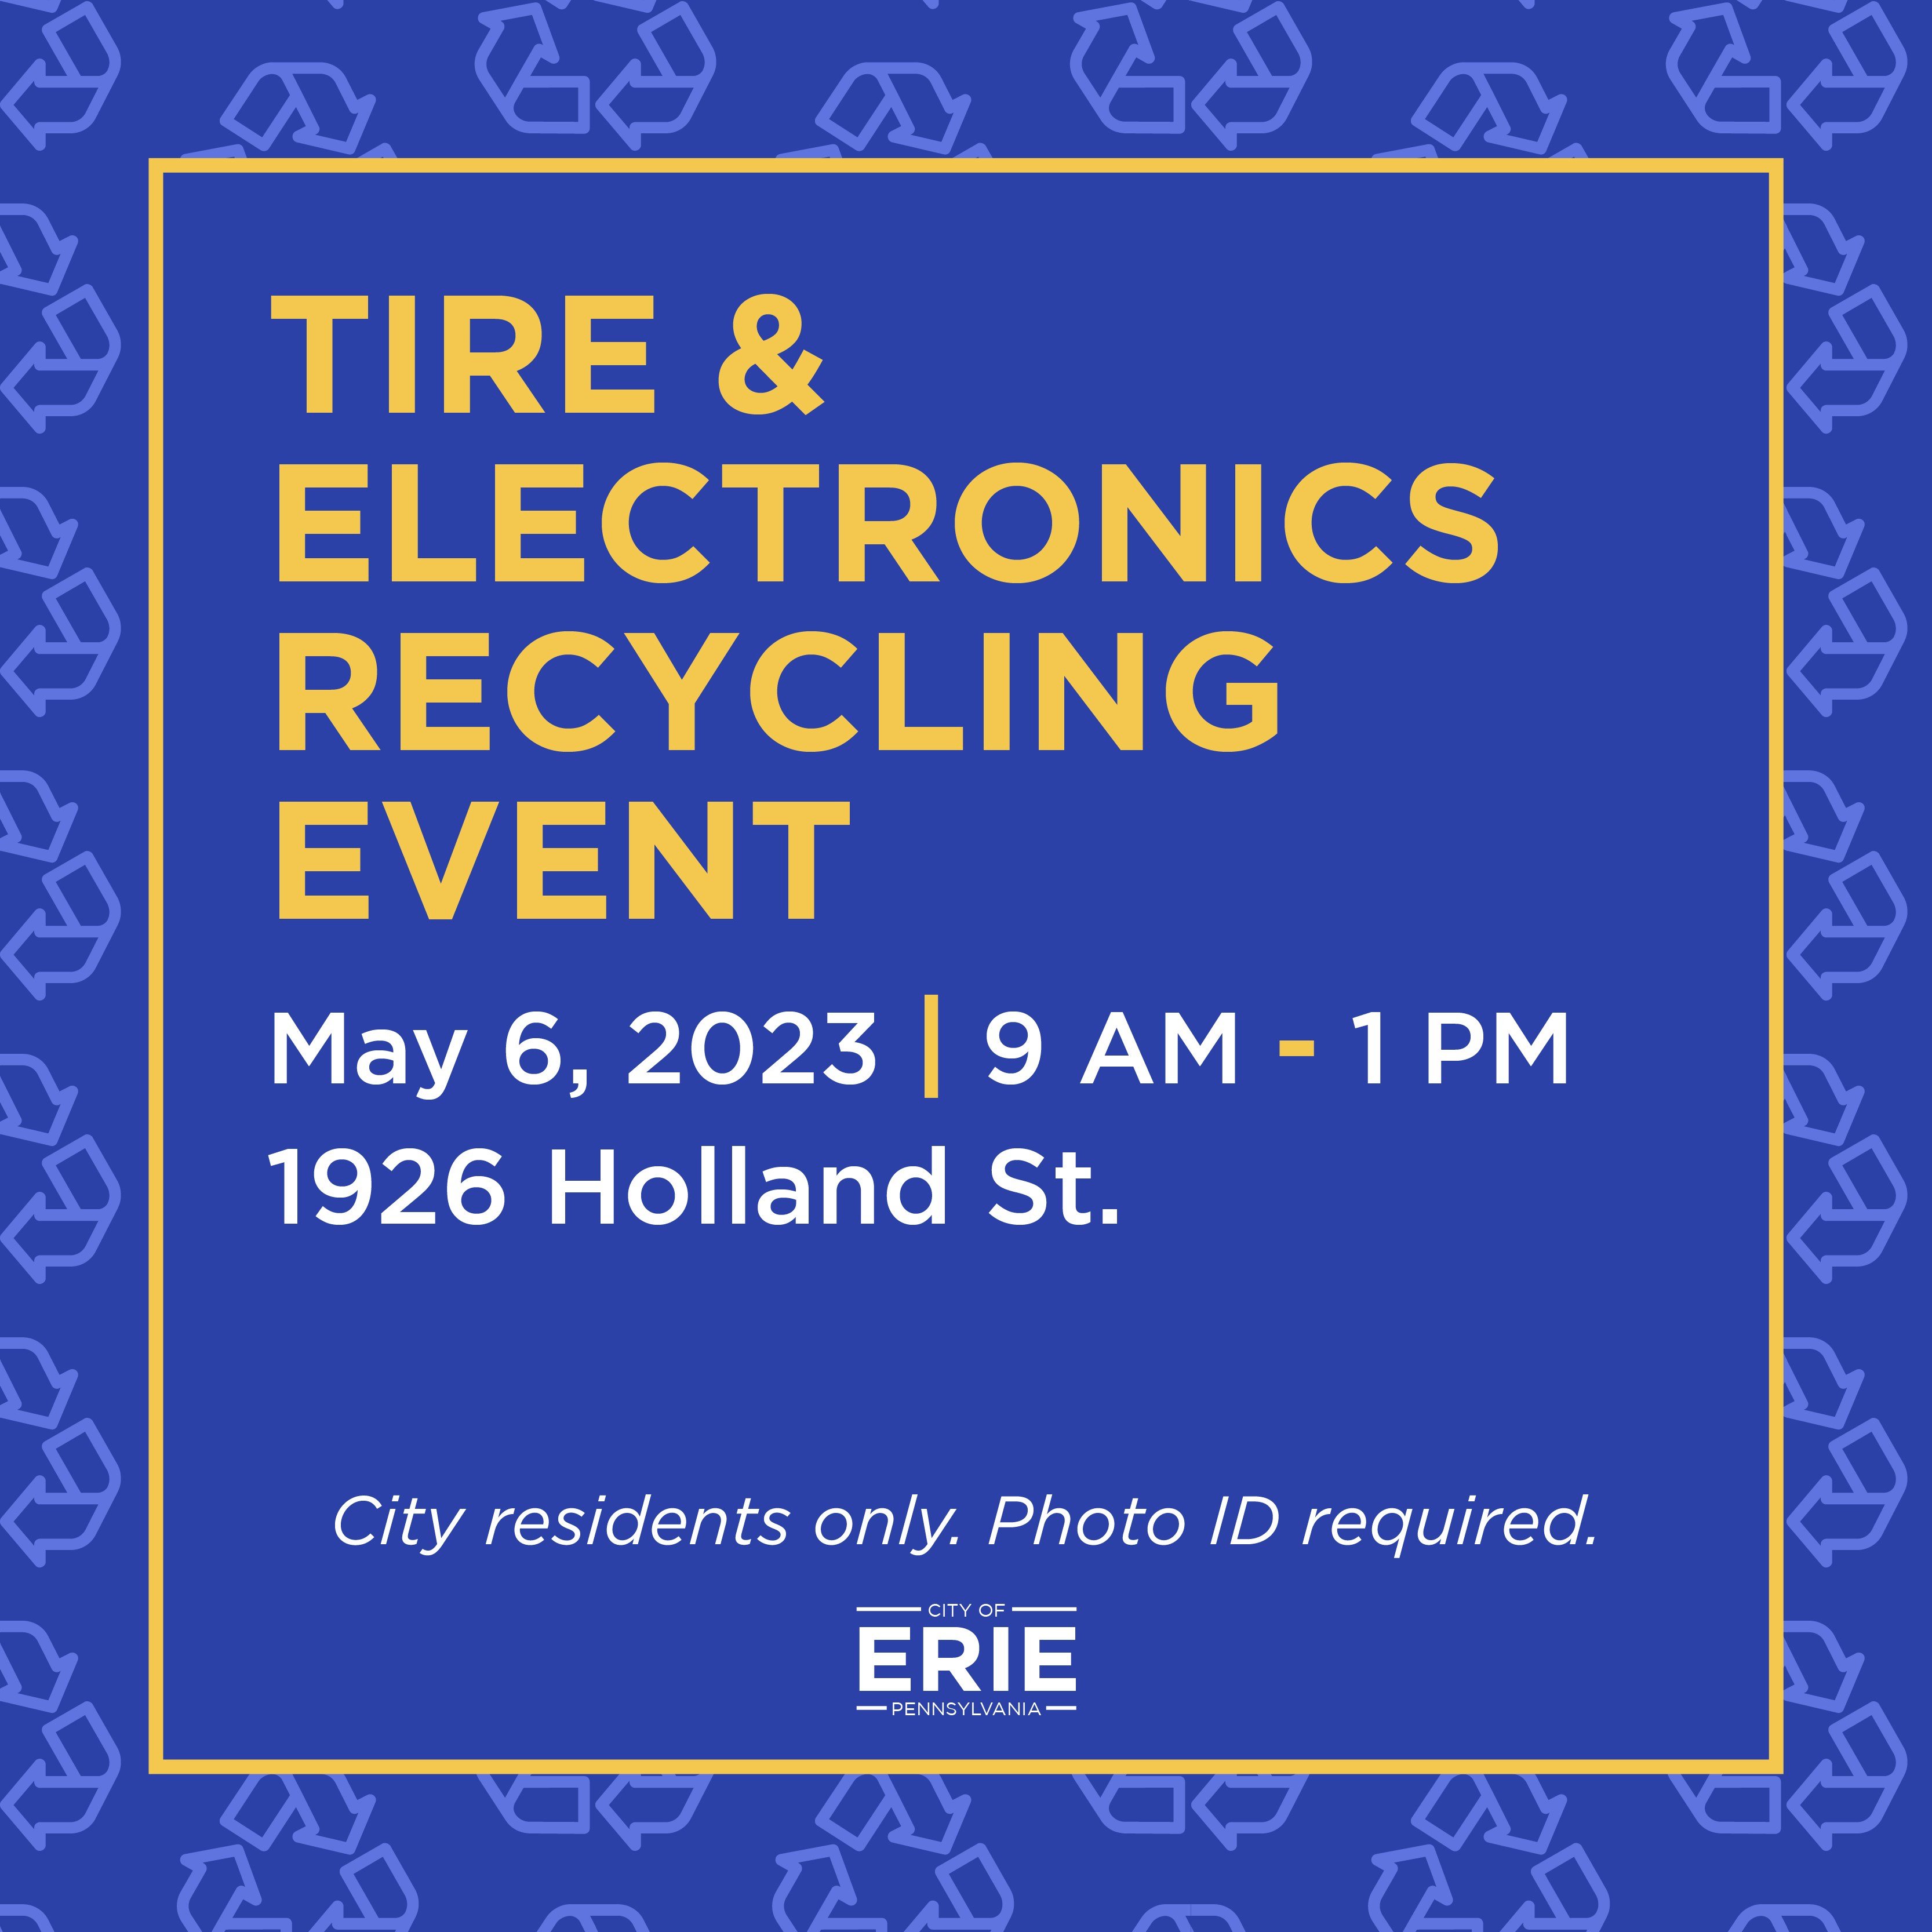 City of Erie to Host Annual Tire and Electronics Recycling at Event